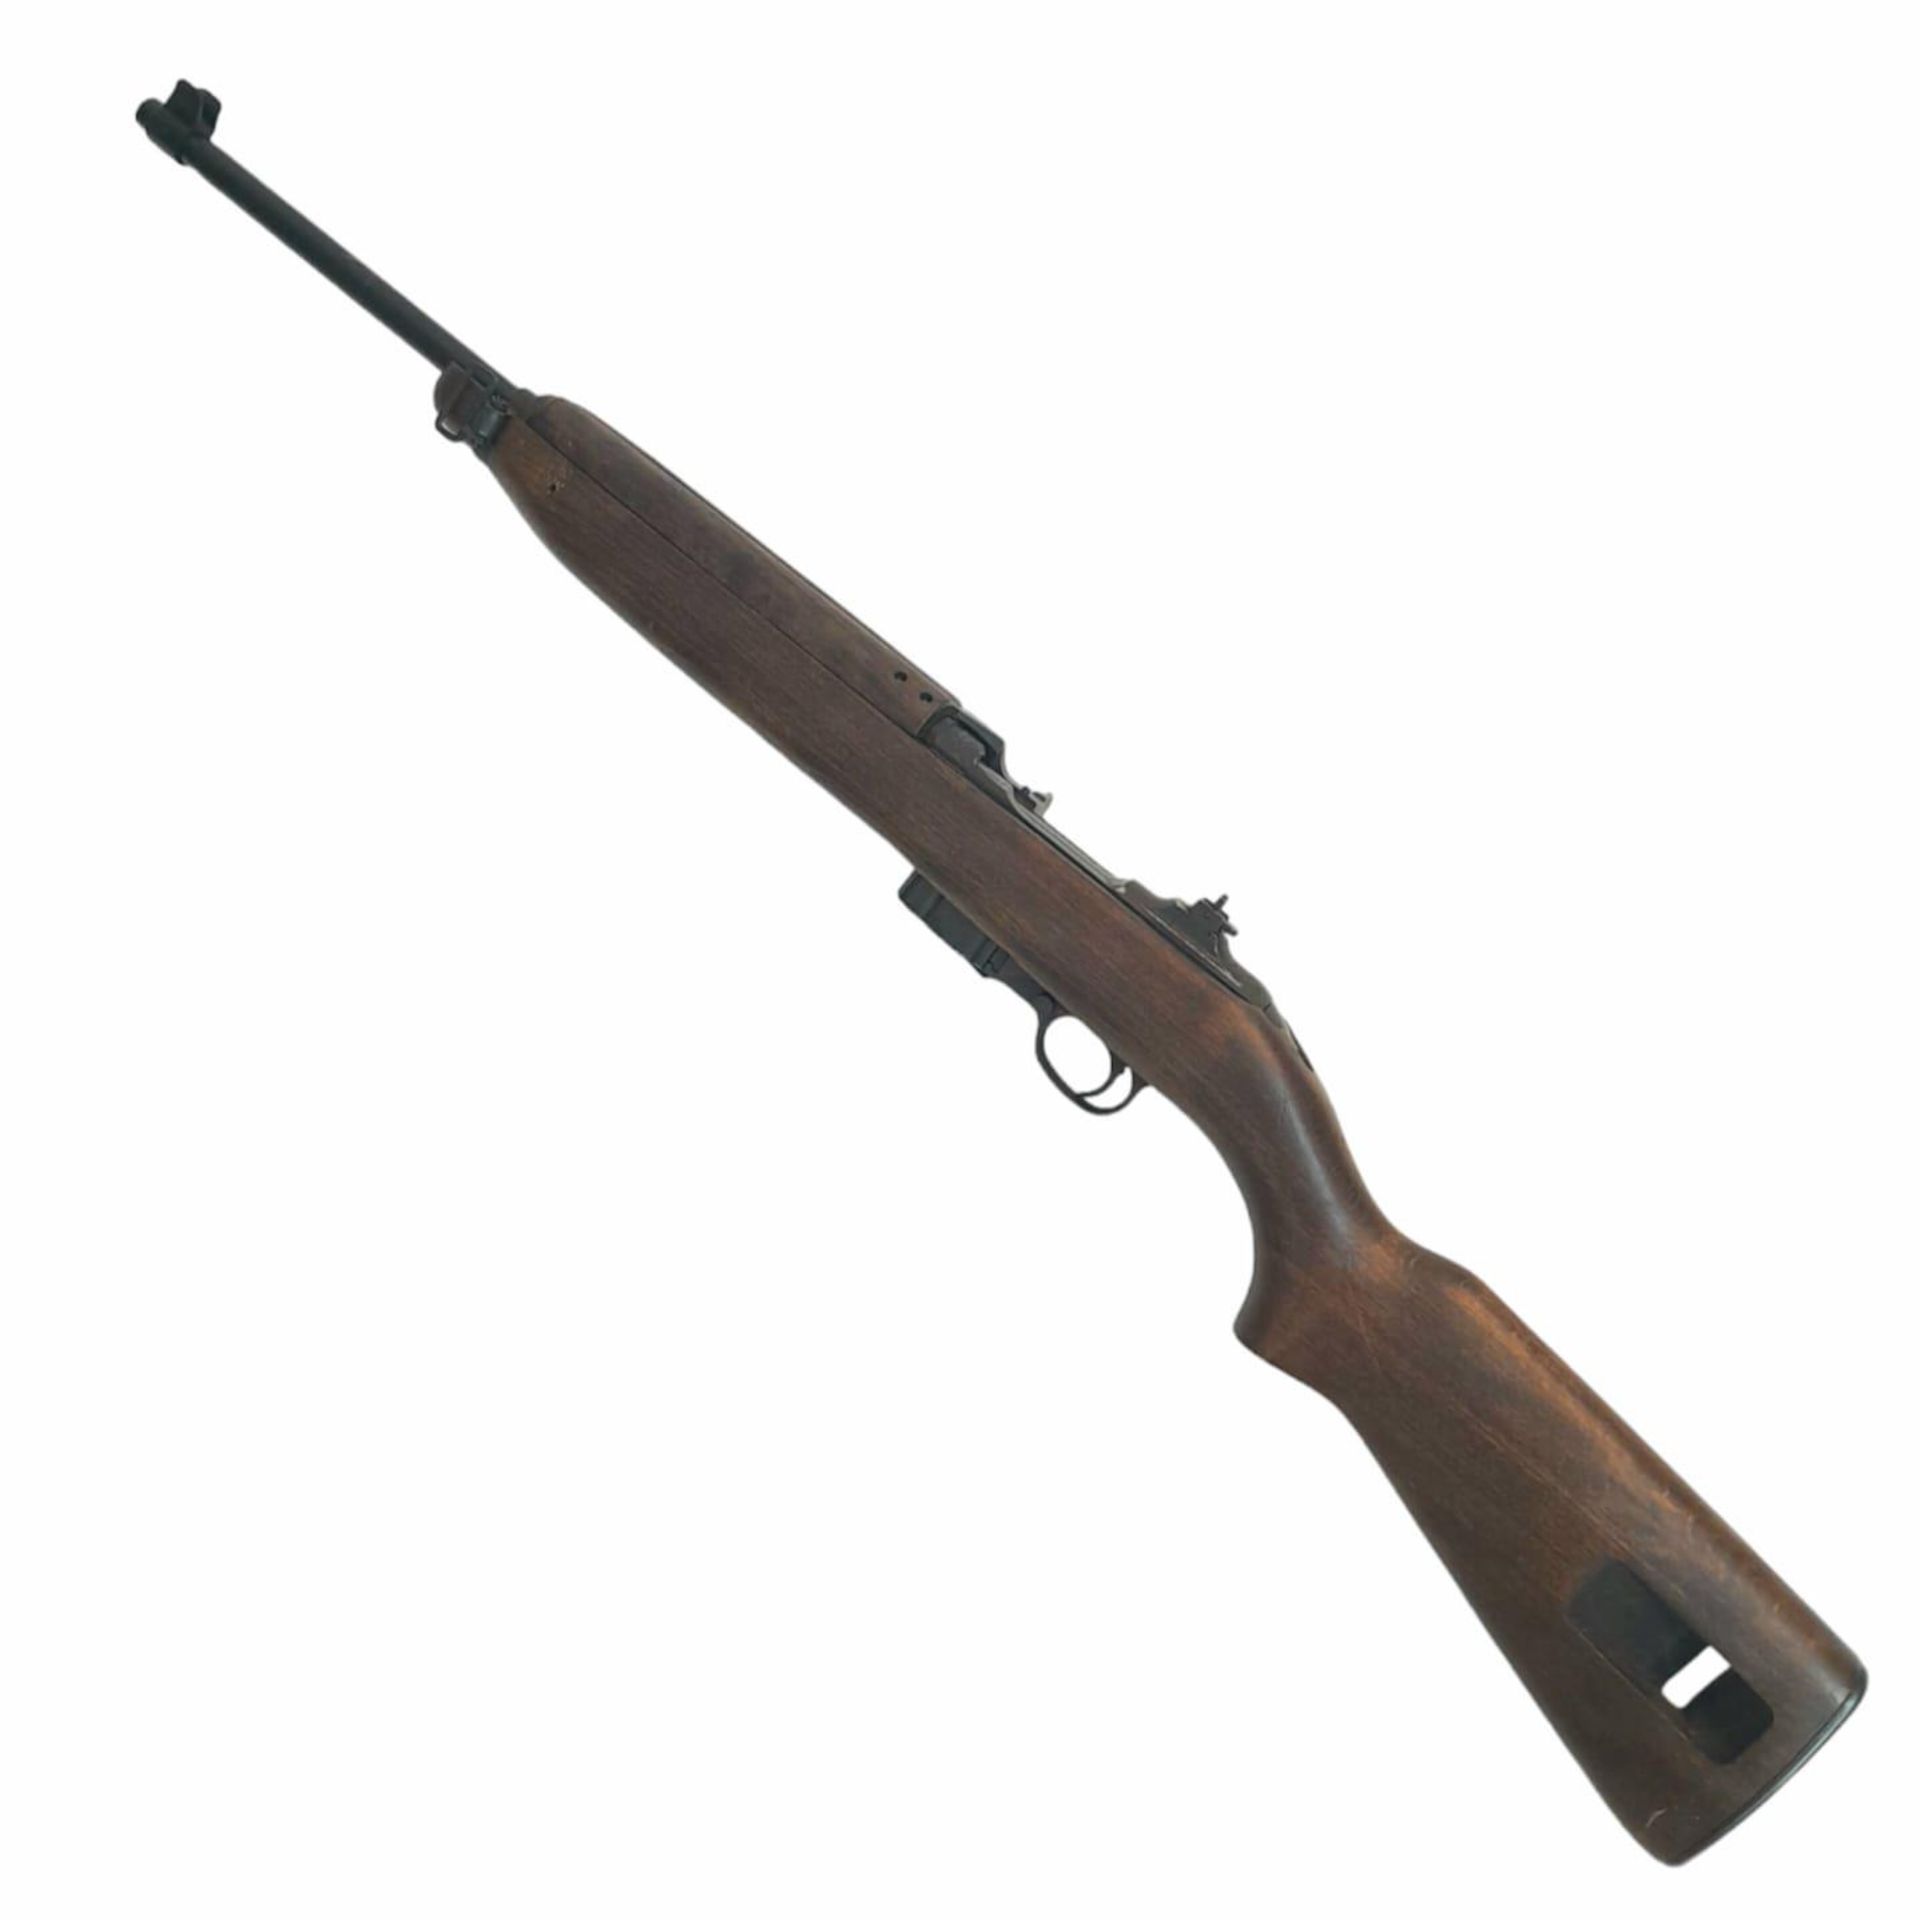 A Deactivated Winchester M1 Carbine Self Loading Rifle. Used by the USA in warfare from 1942-73 this - Image 3 of 12